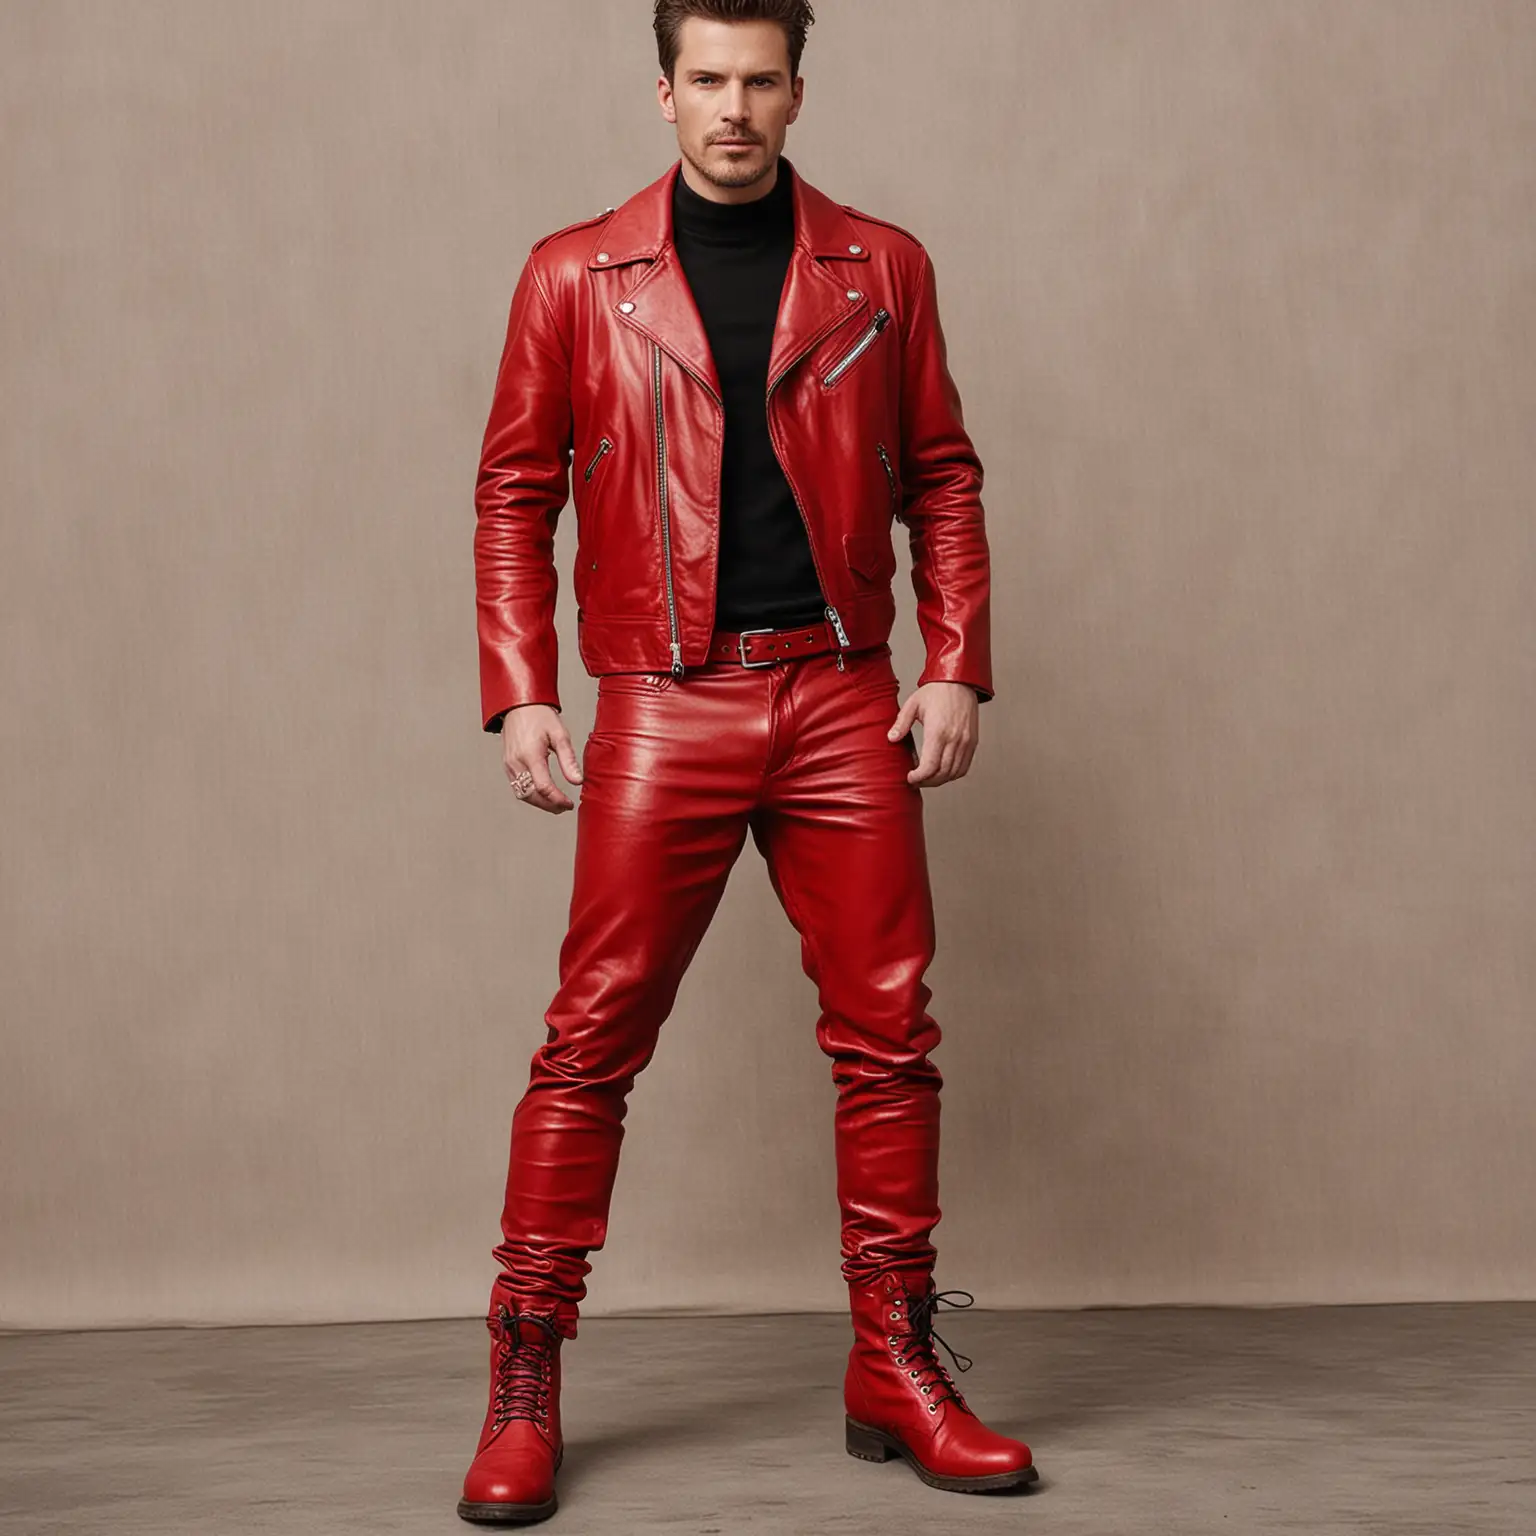 A man wearing red leather pants, a red leather jacket and red boots 